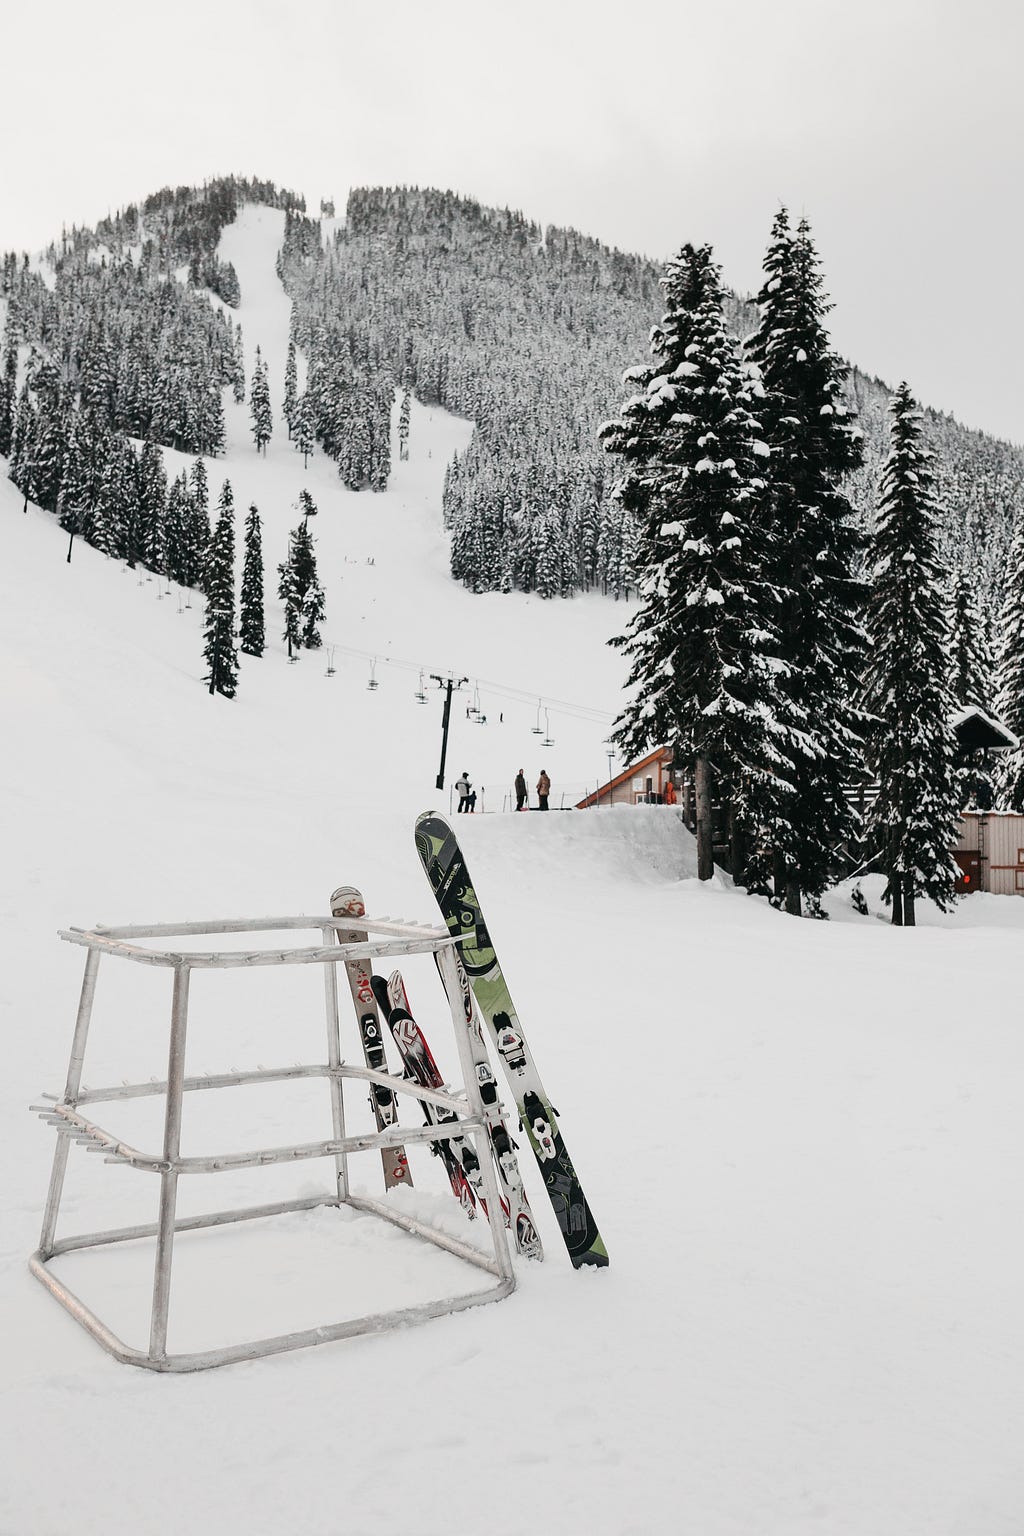 Skis on a stand in front of a snowy ski slope and pines trees.